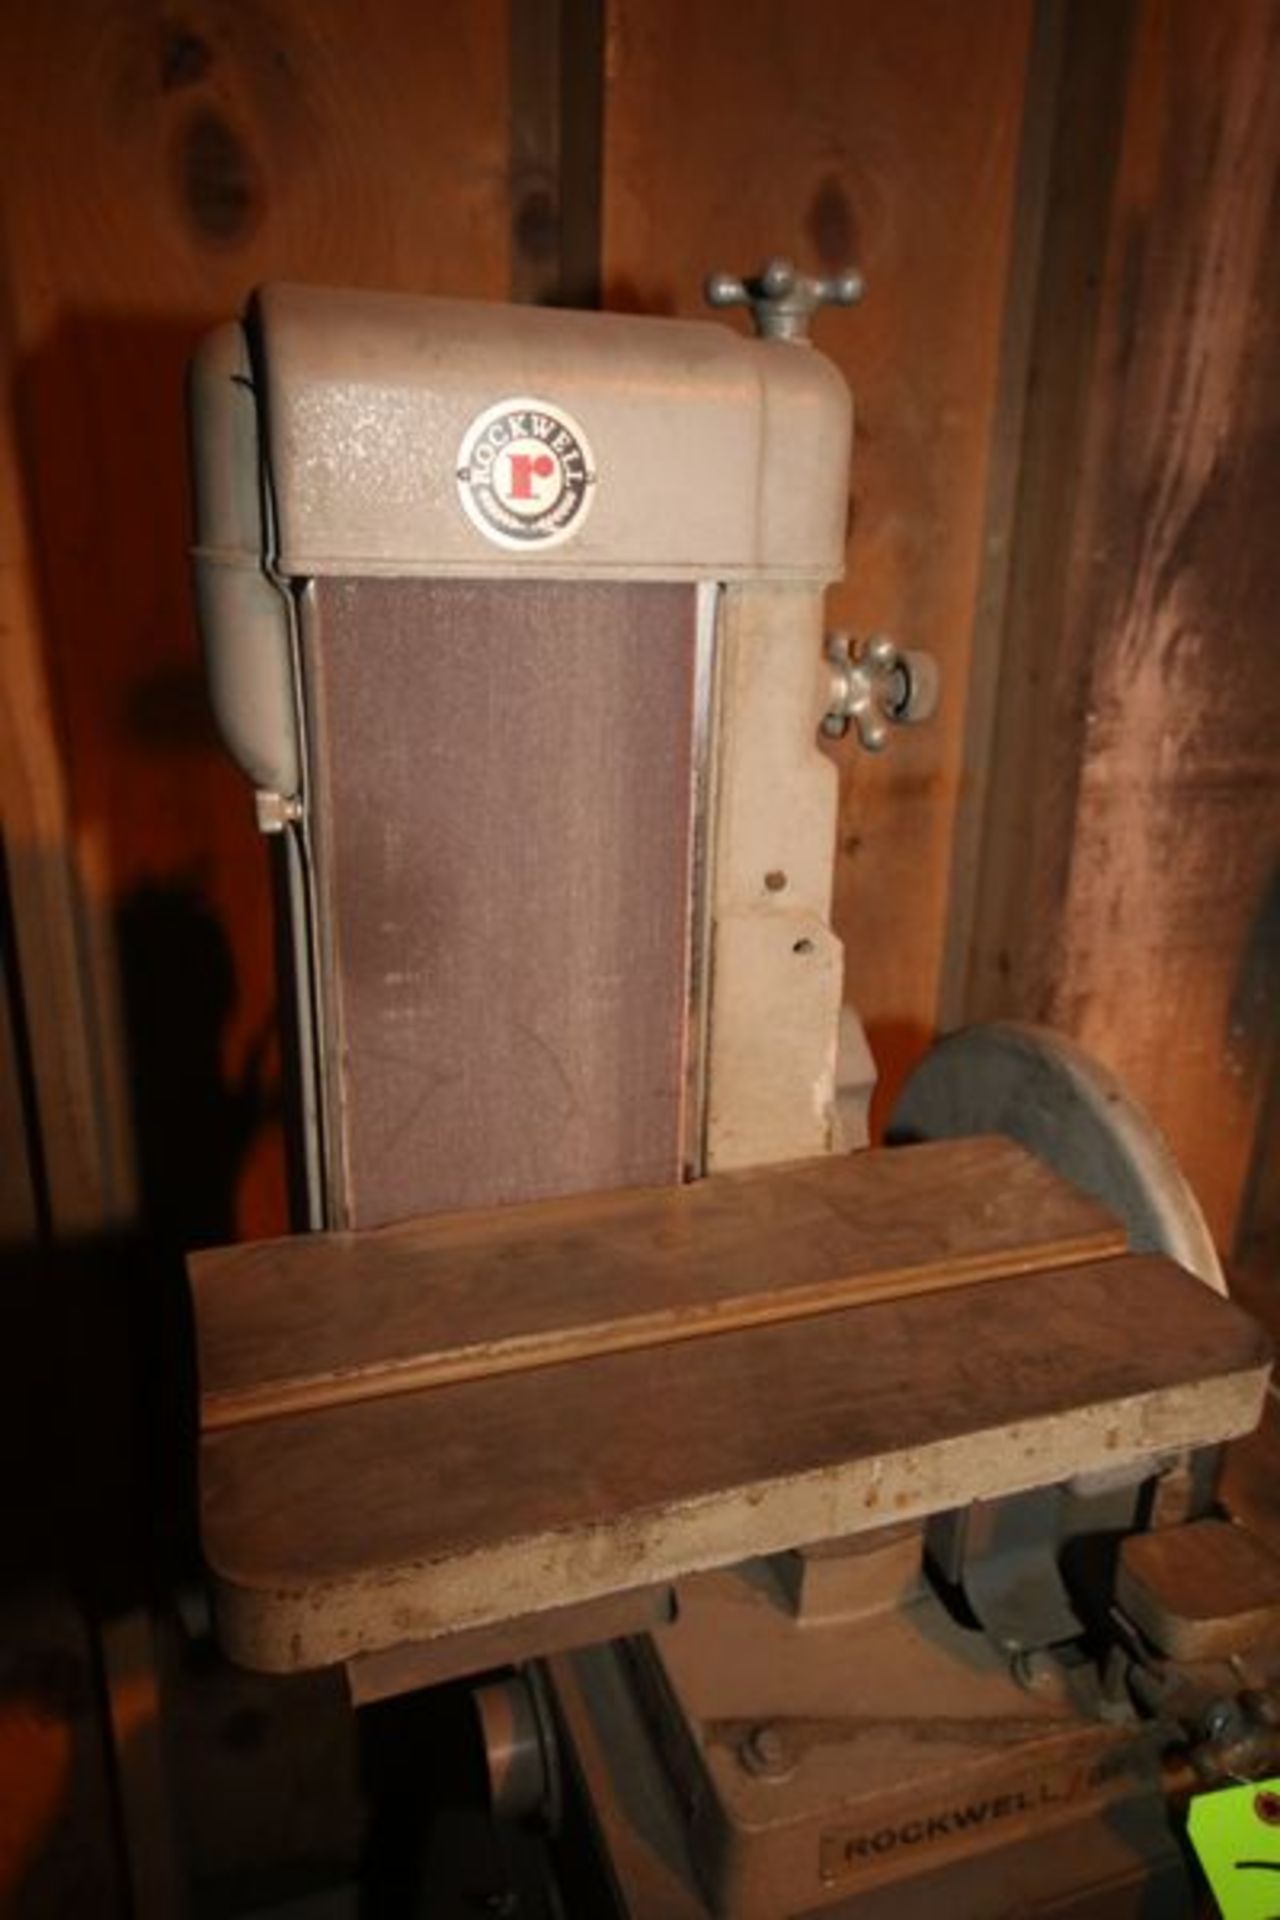 Rockwell Band and Disc Sander, Series 31710, S/N GF9277, Working Area Aprox. 14-1/2" x 7-1/2" - Image 3 of 4